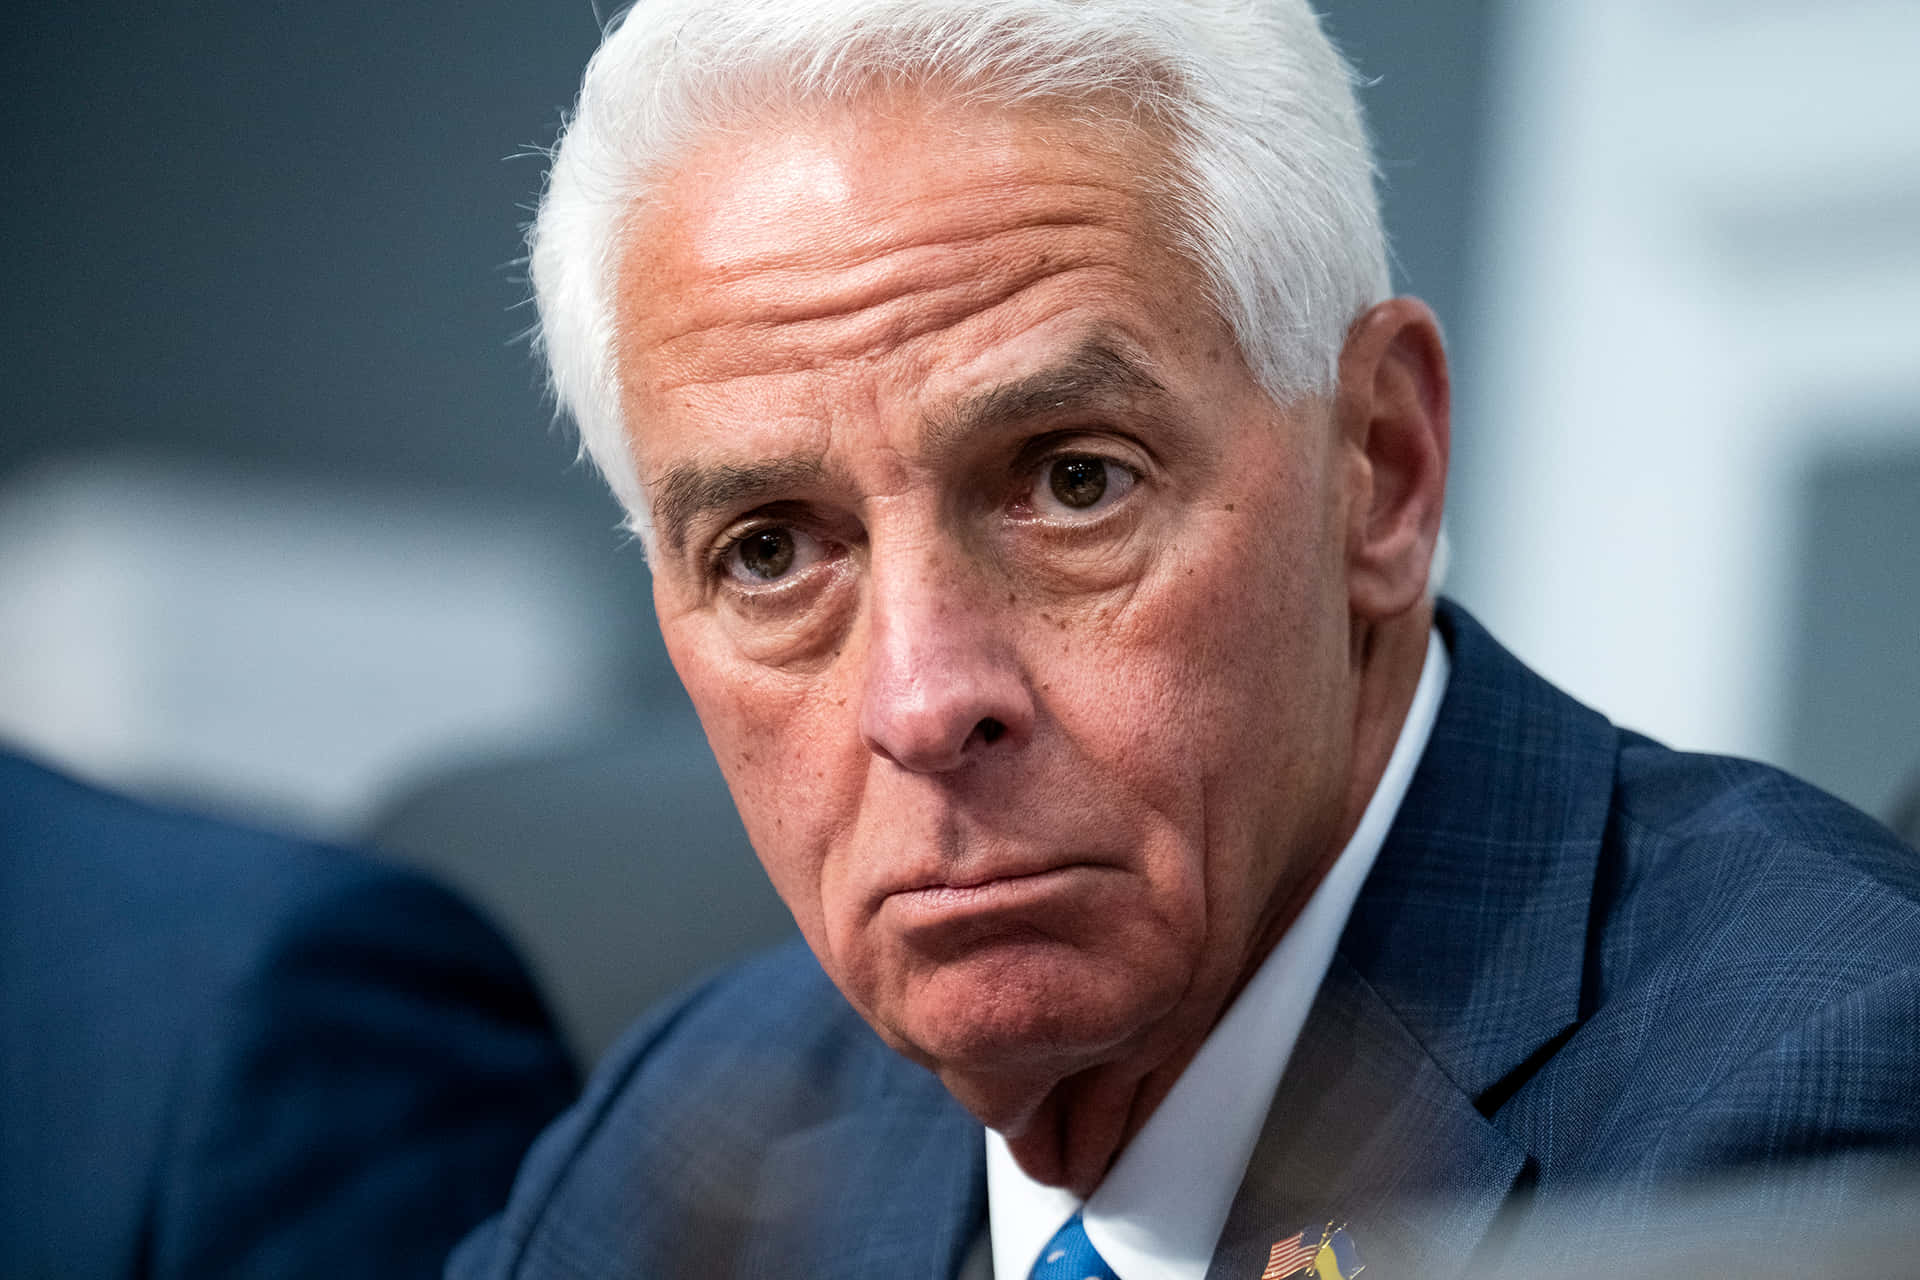 Charlie Crist Serious Frown Wallpaper